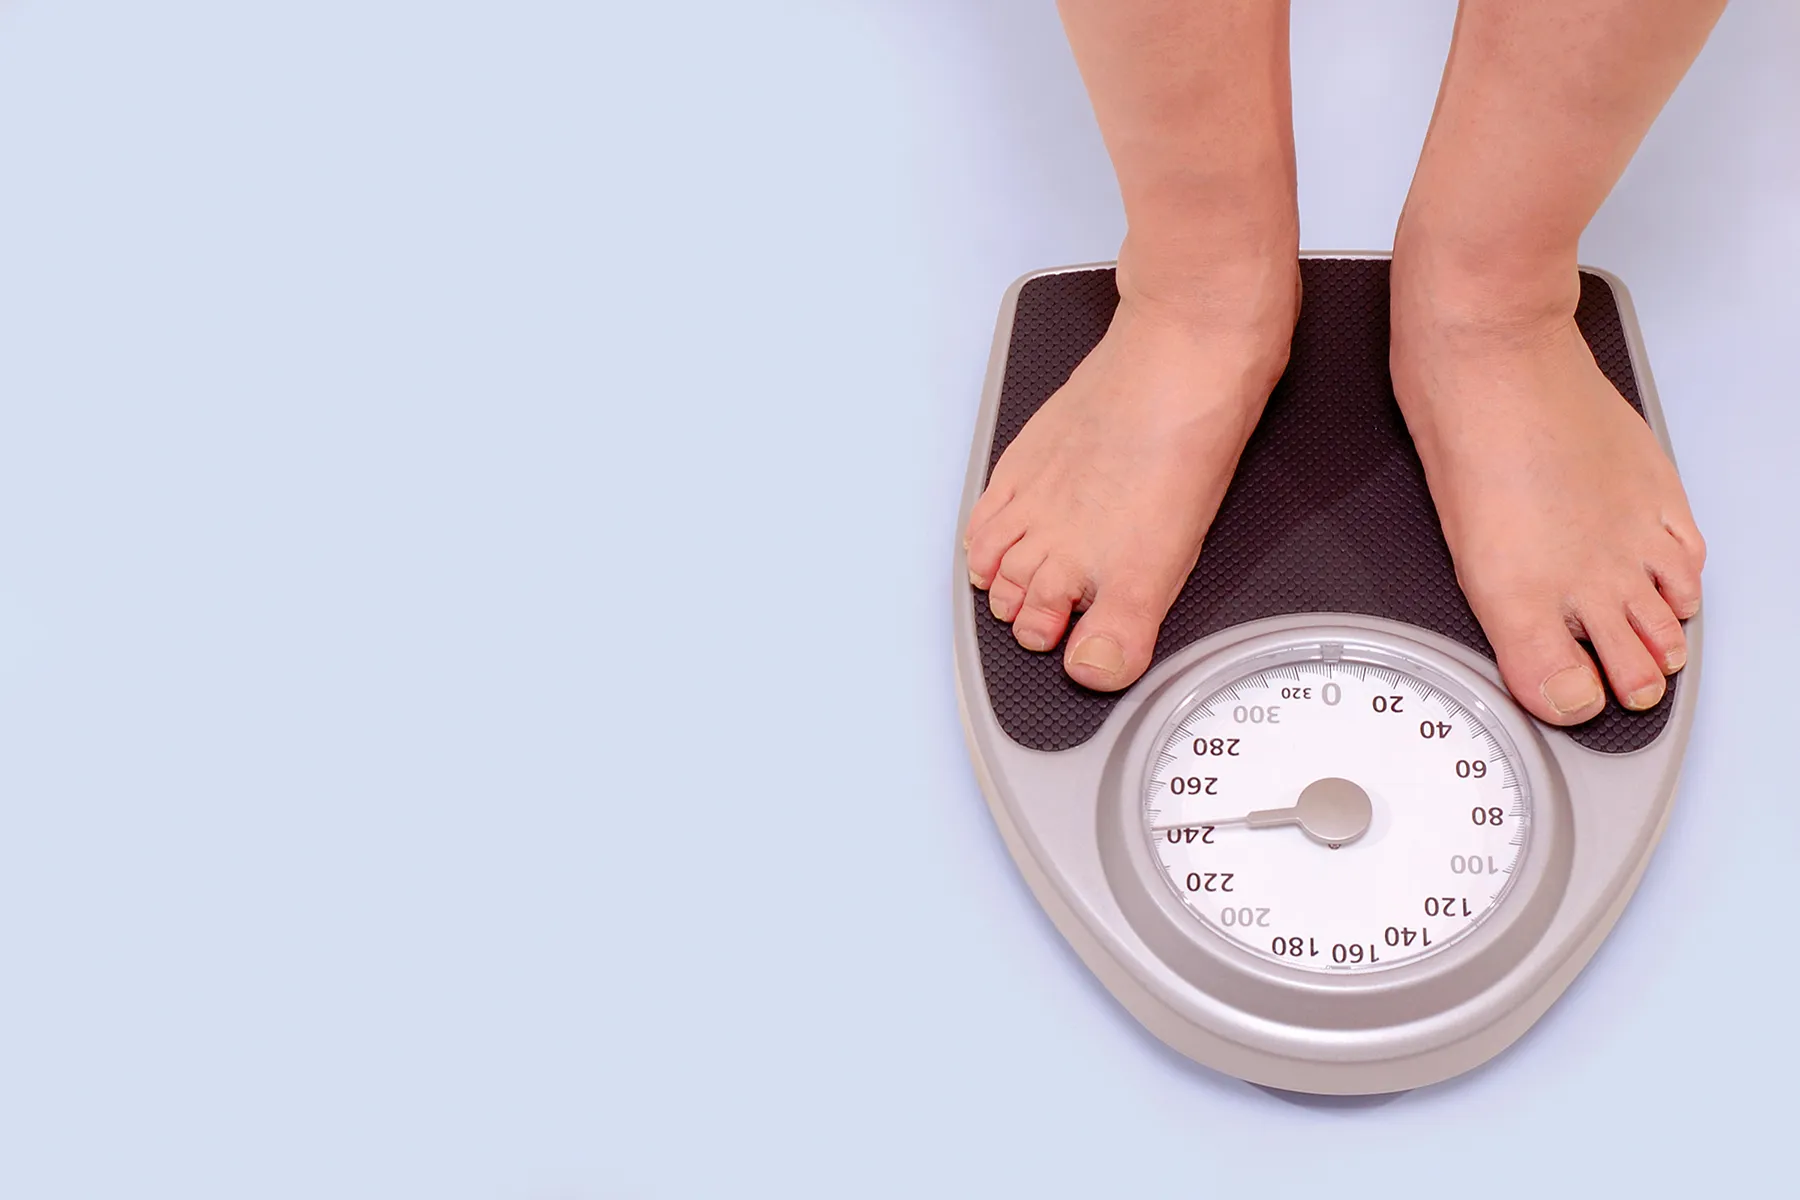 Can Overweight Docs Really Give Credible Weight Loss Advice?